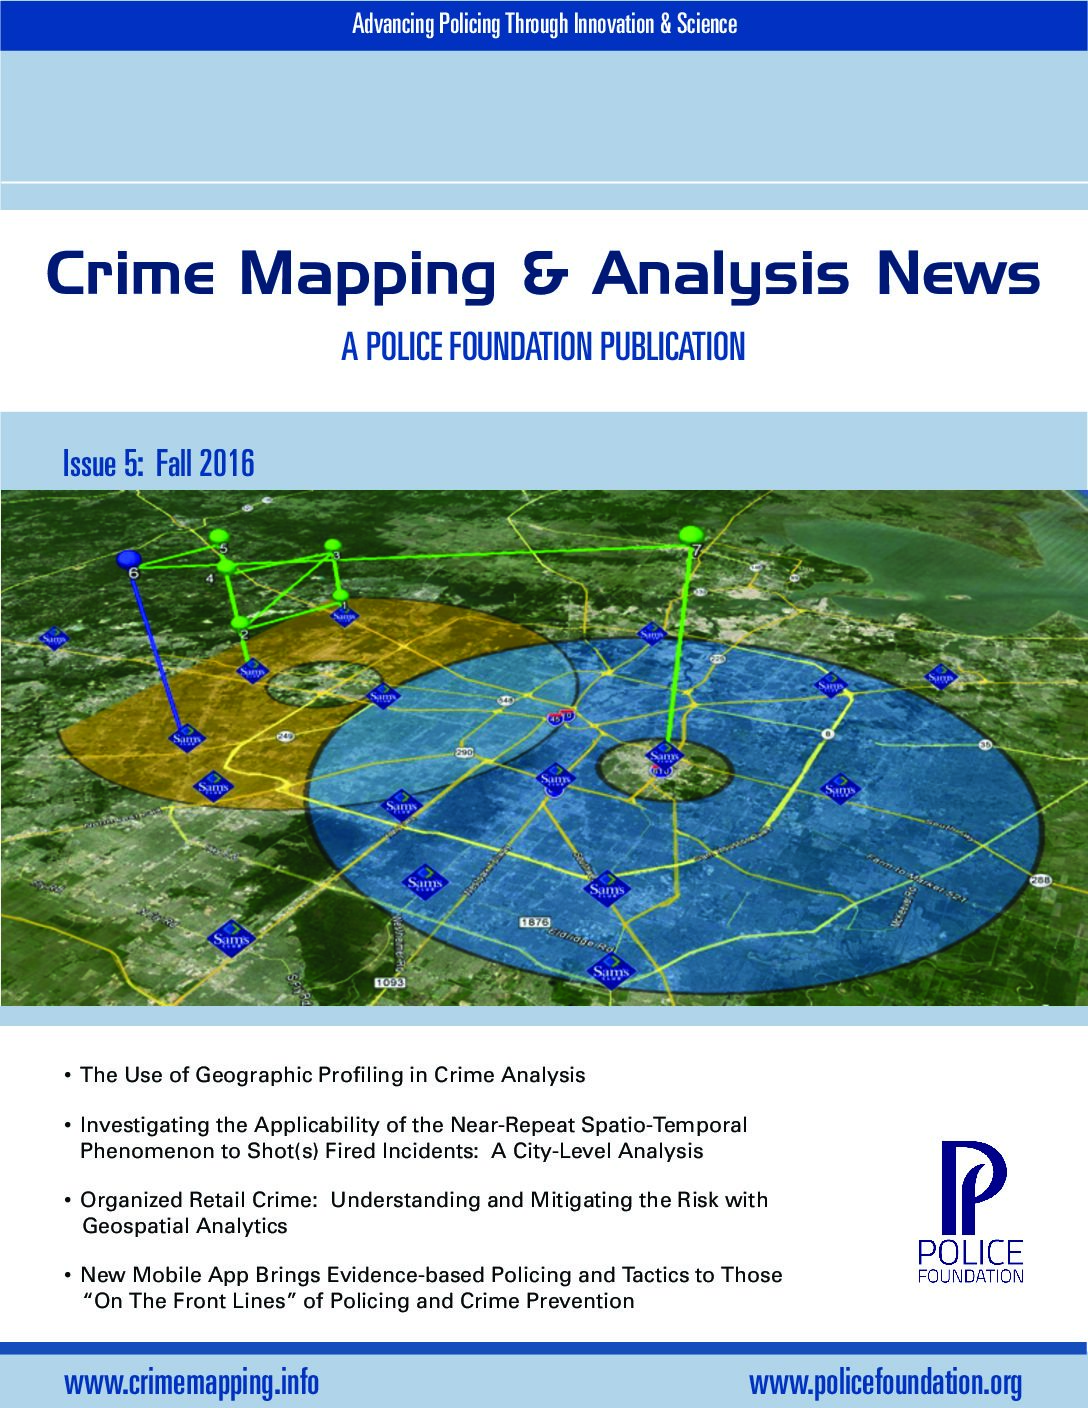 Crime mapping and analysis news issue 5